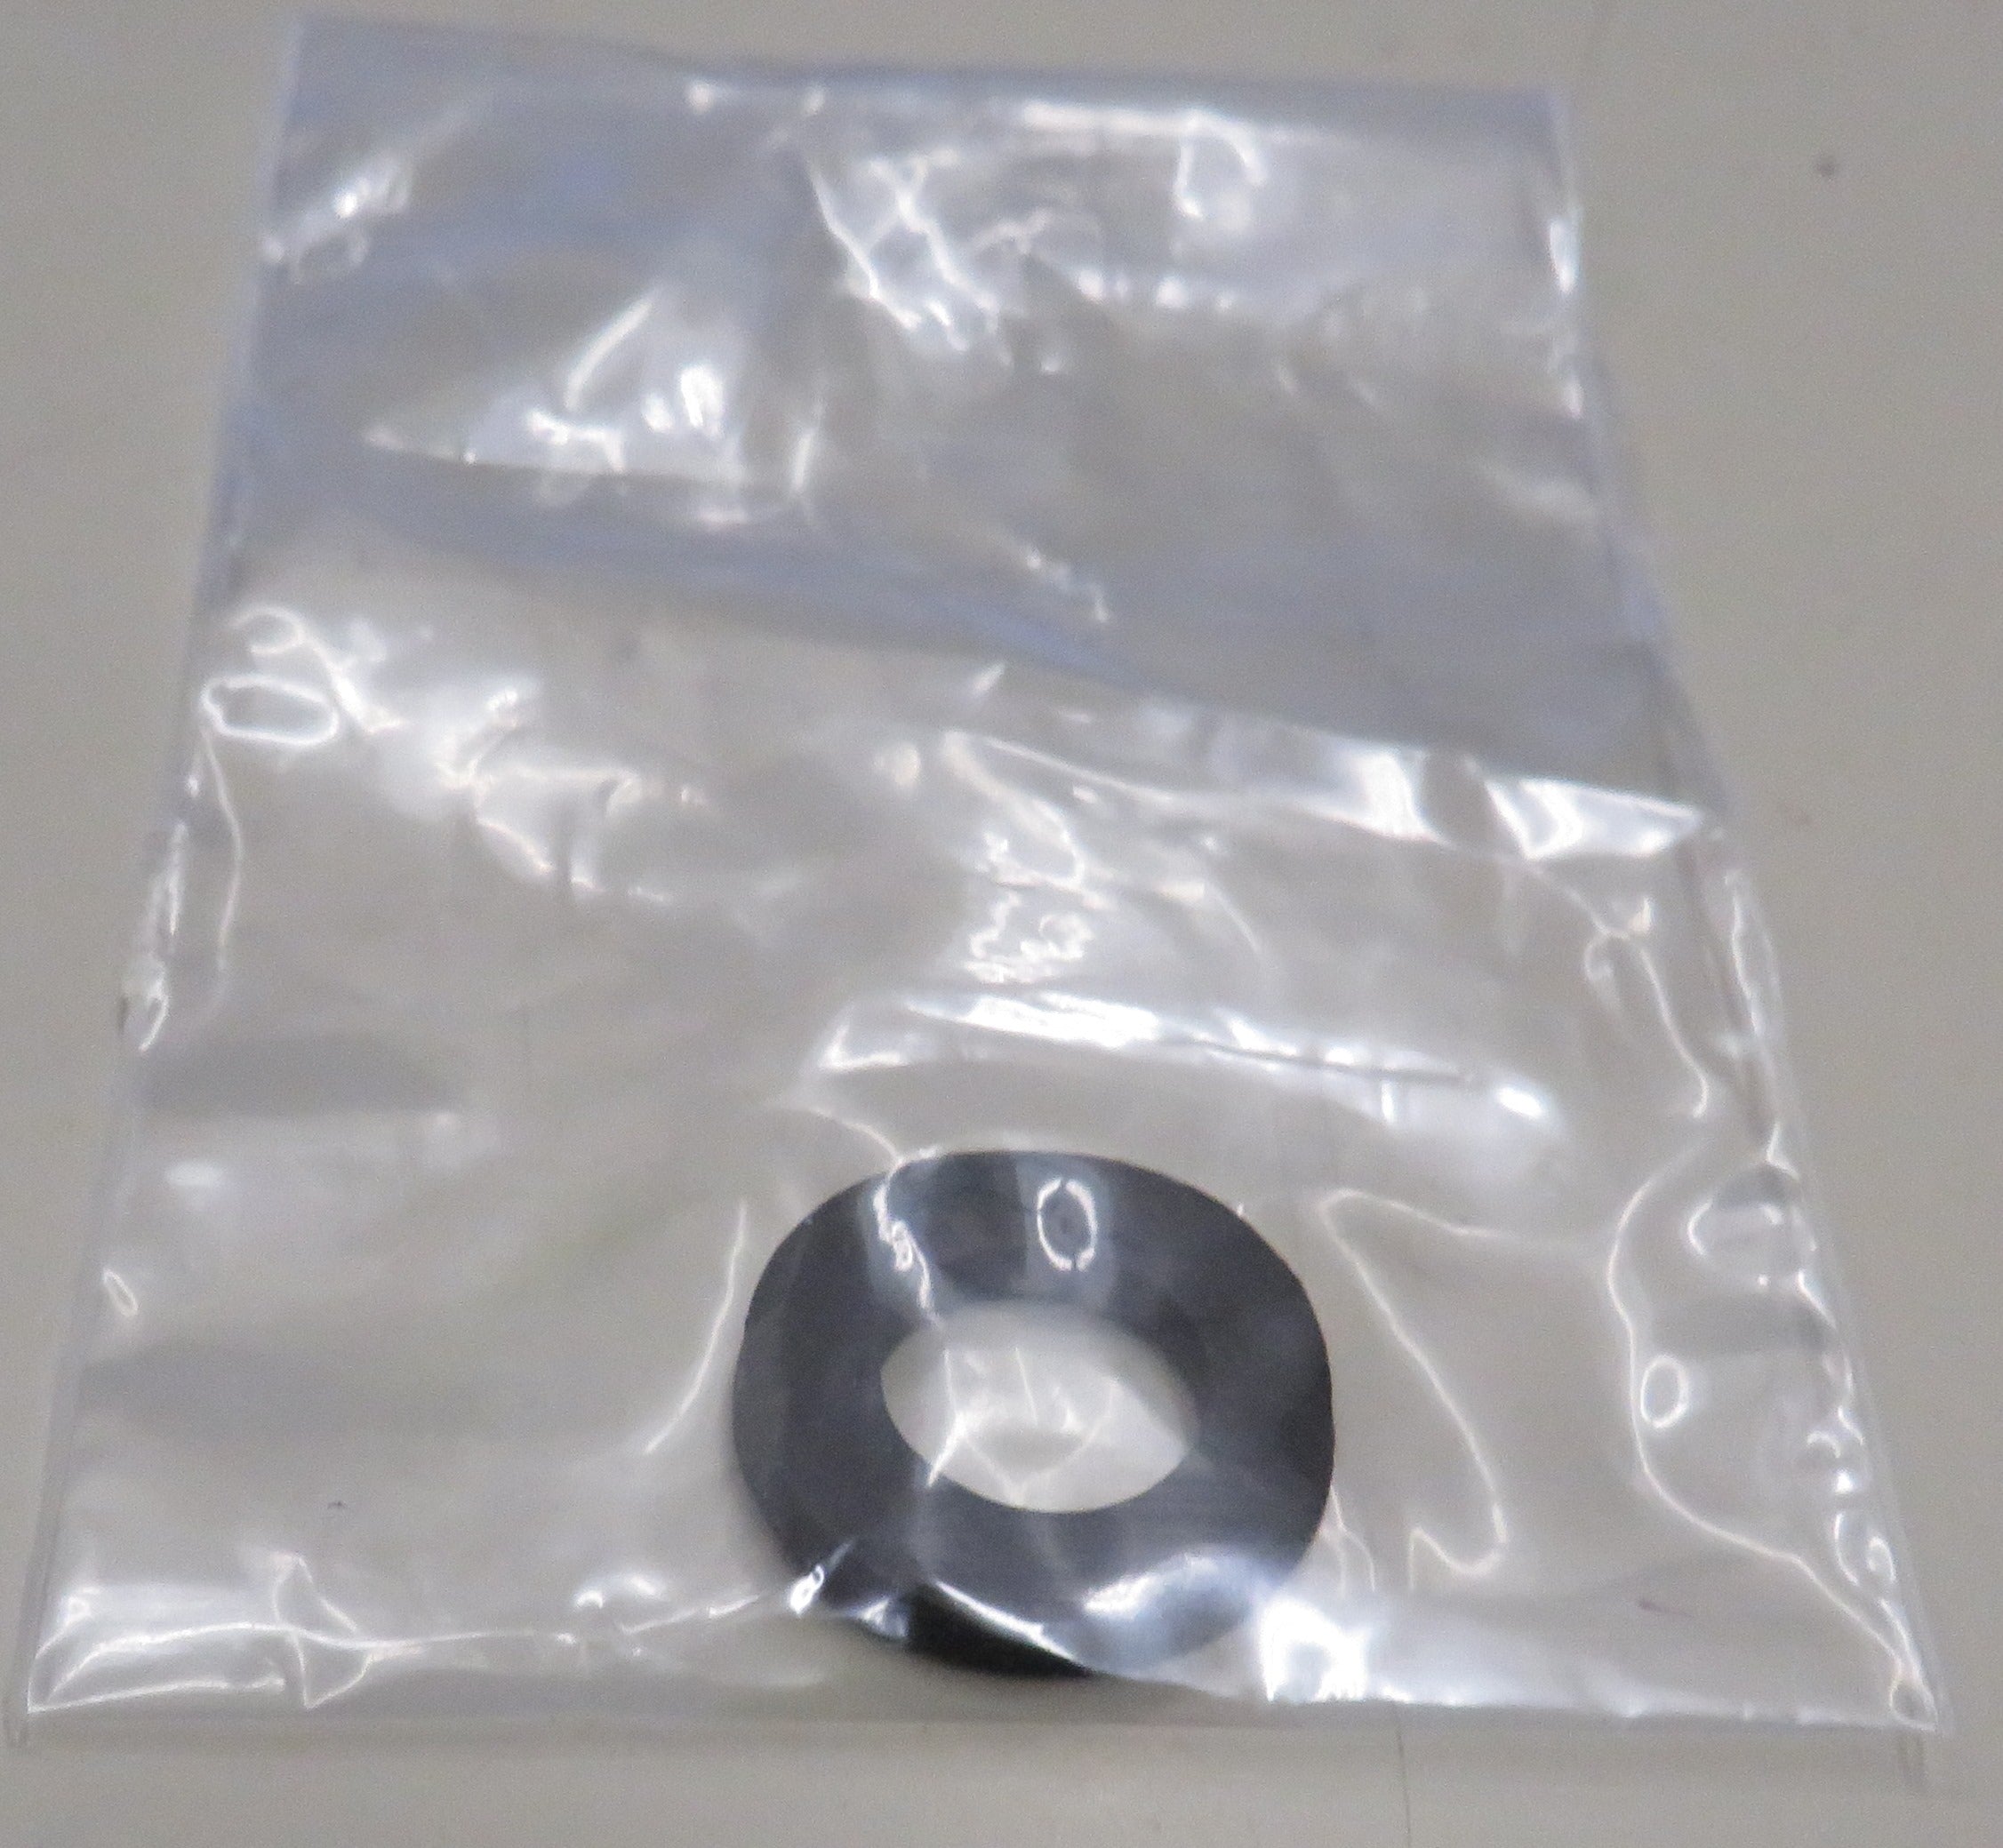 Homestrand Kenyon Fill Cap Gasket H1221 (B93010) (1 Pk) OBSOLETE 5/14/2024 THIS PART IS IN STOCK 5/14/2024